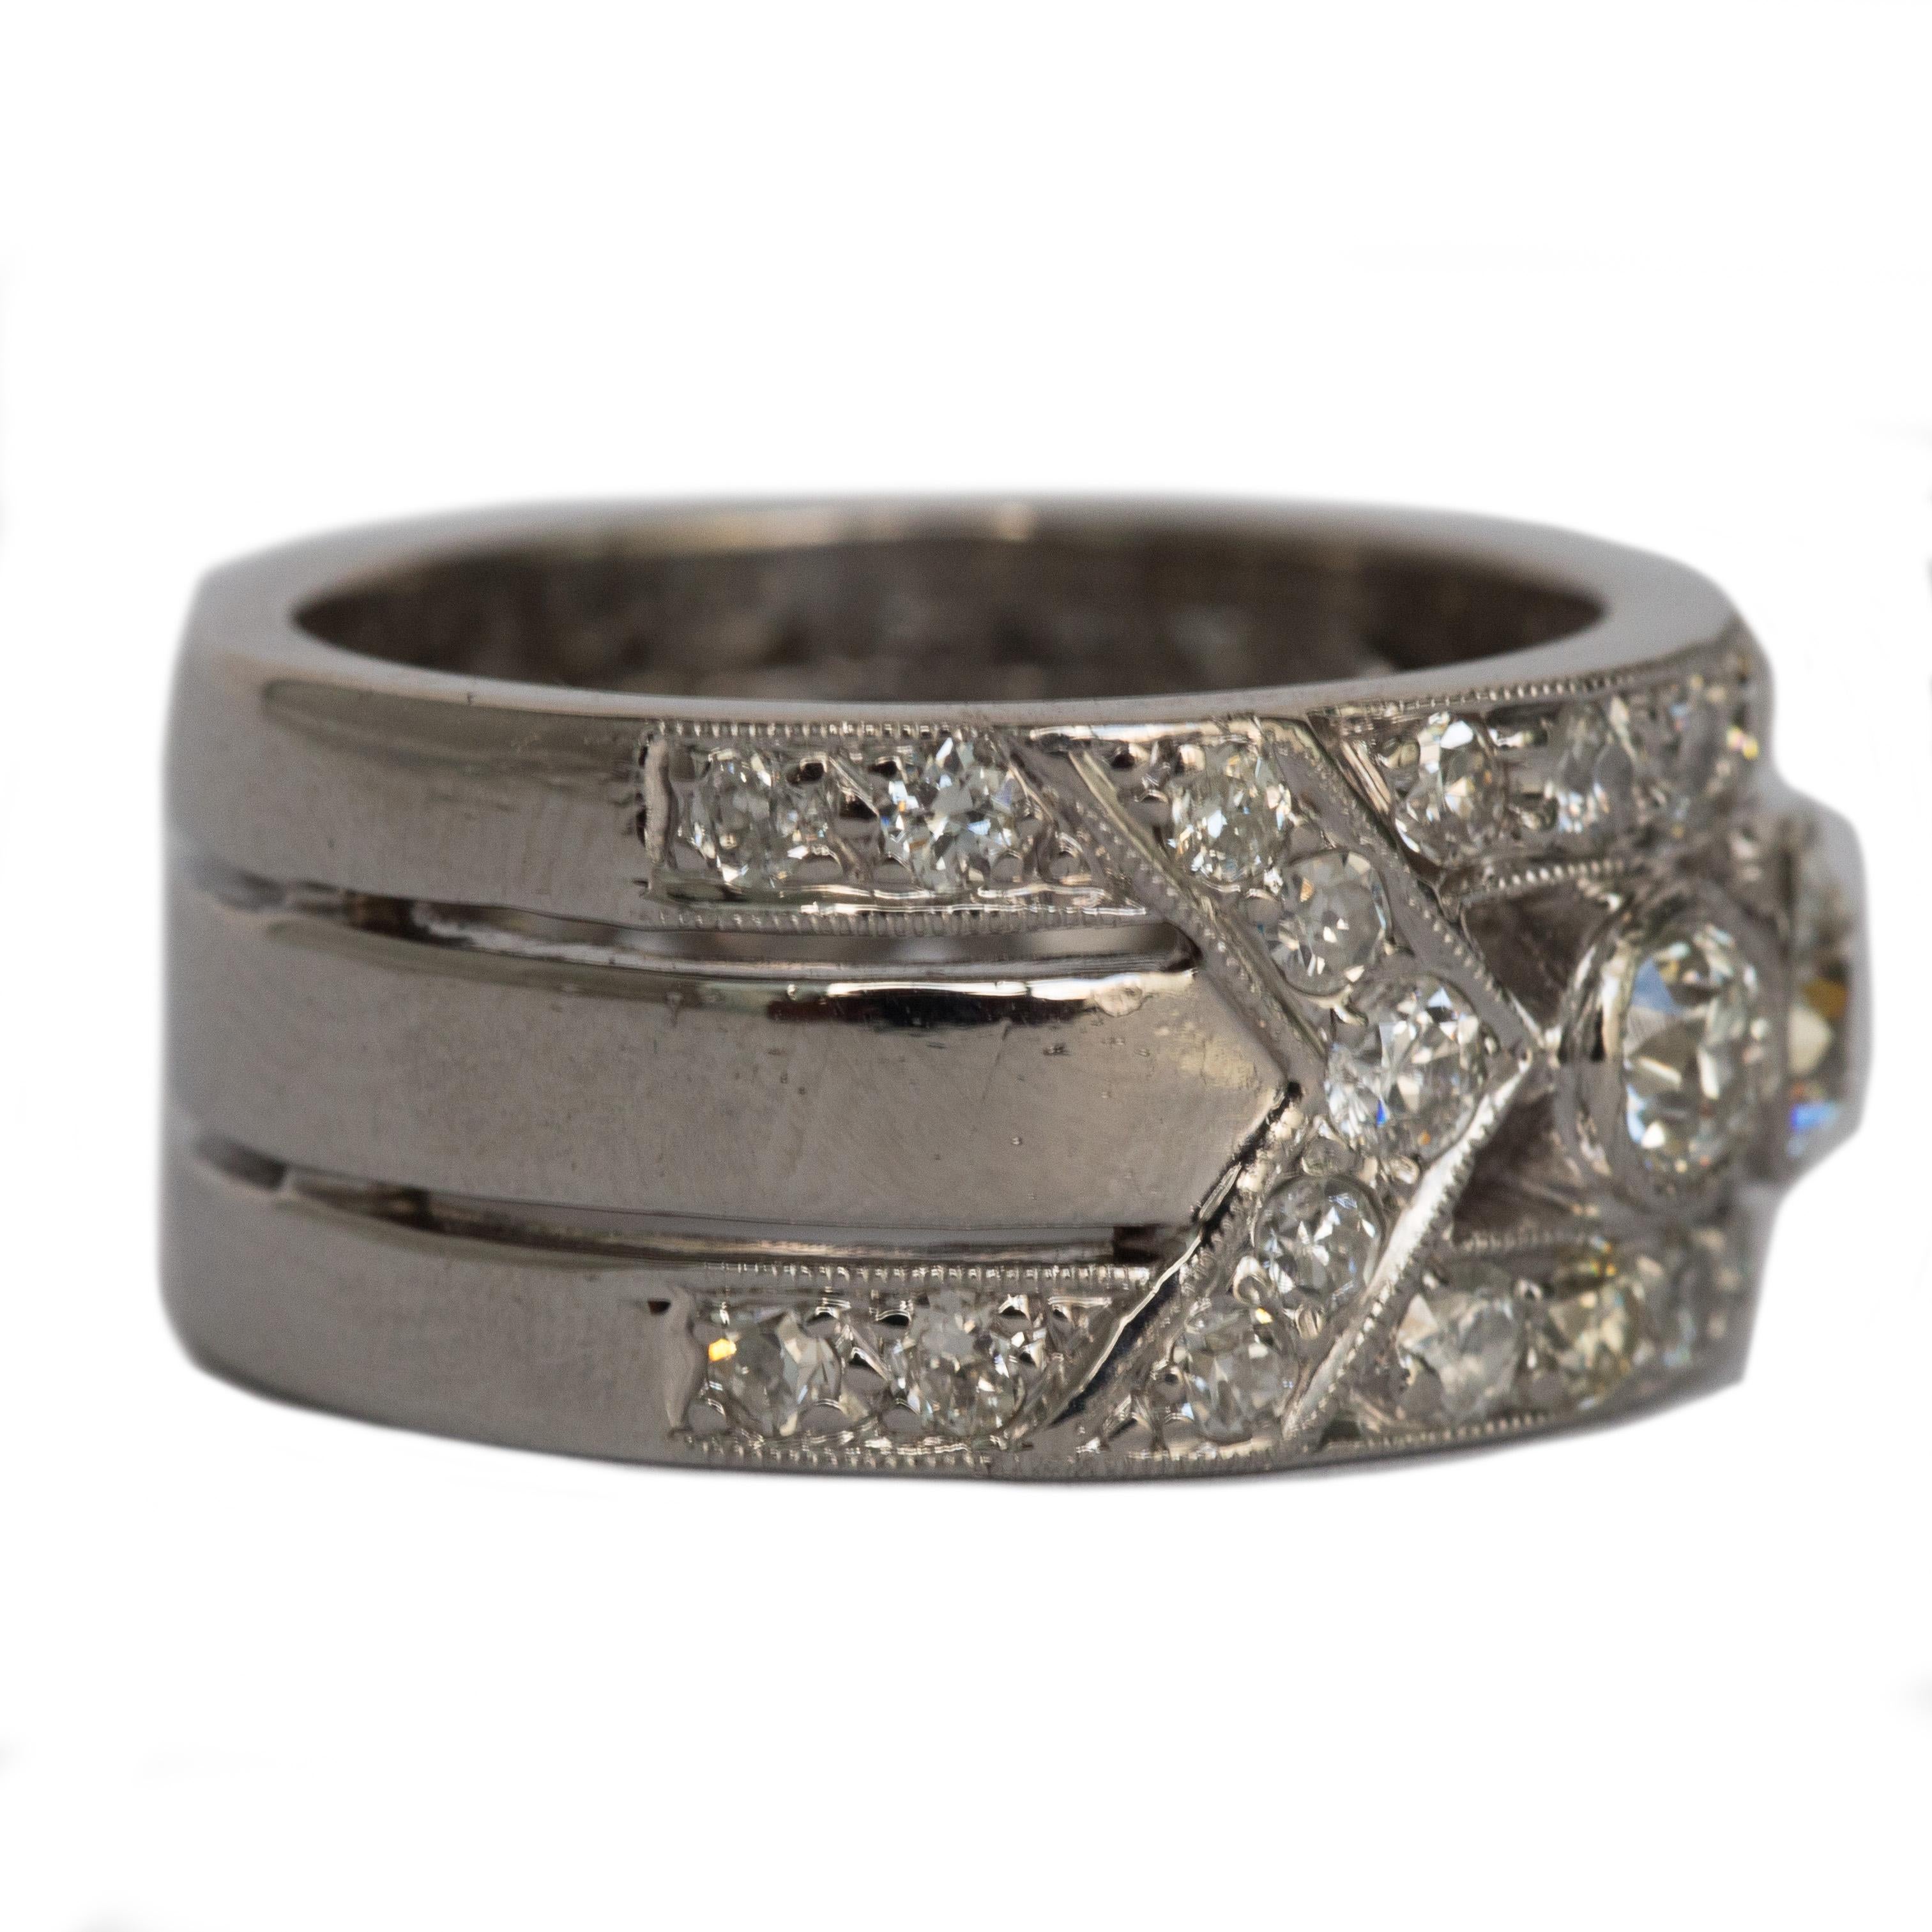 Ring Size: 6
Metal Type: Platinum
Weight: 15.0 grams

Diamond Details
Shape: Old European Brilliant and Antique Single Cut 
Carat Weight: 3.25 carat, total weight
Color: G
Clarity: VS

Finger to Top of Stone Measurement: 2.25mm
Width: 9.73mm